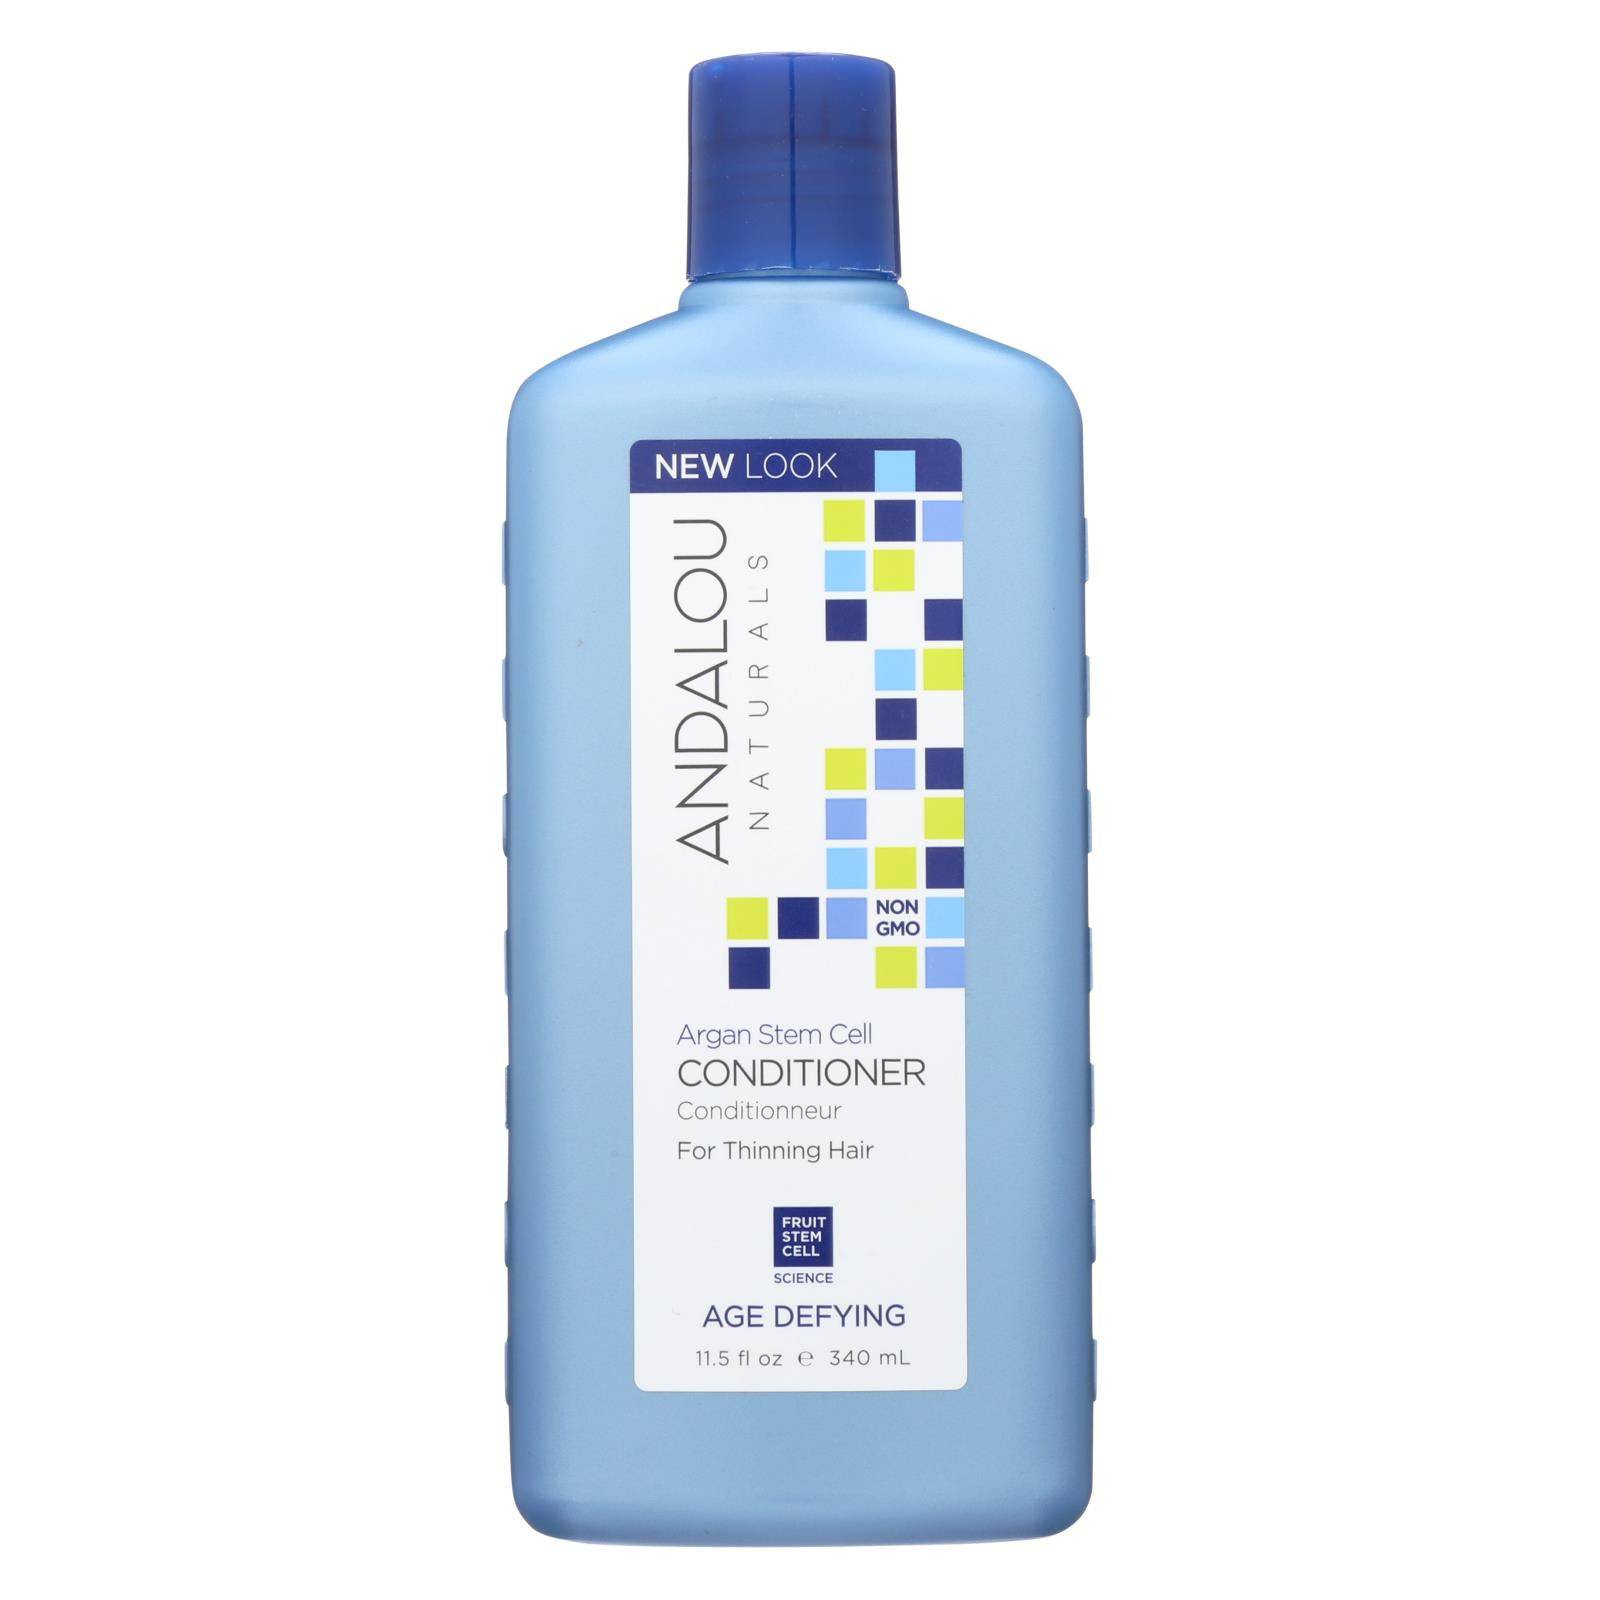 Andalou Naturals Age Defying Conditioner With Argan Stem Cells - 11.5 Fl Oz | OnlyNaturals.us